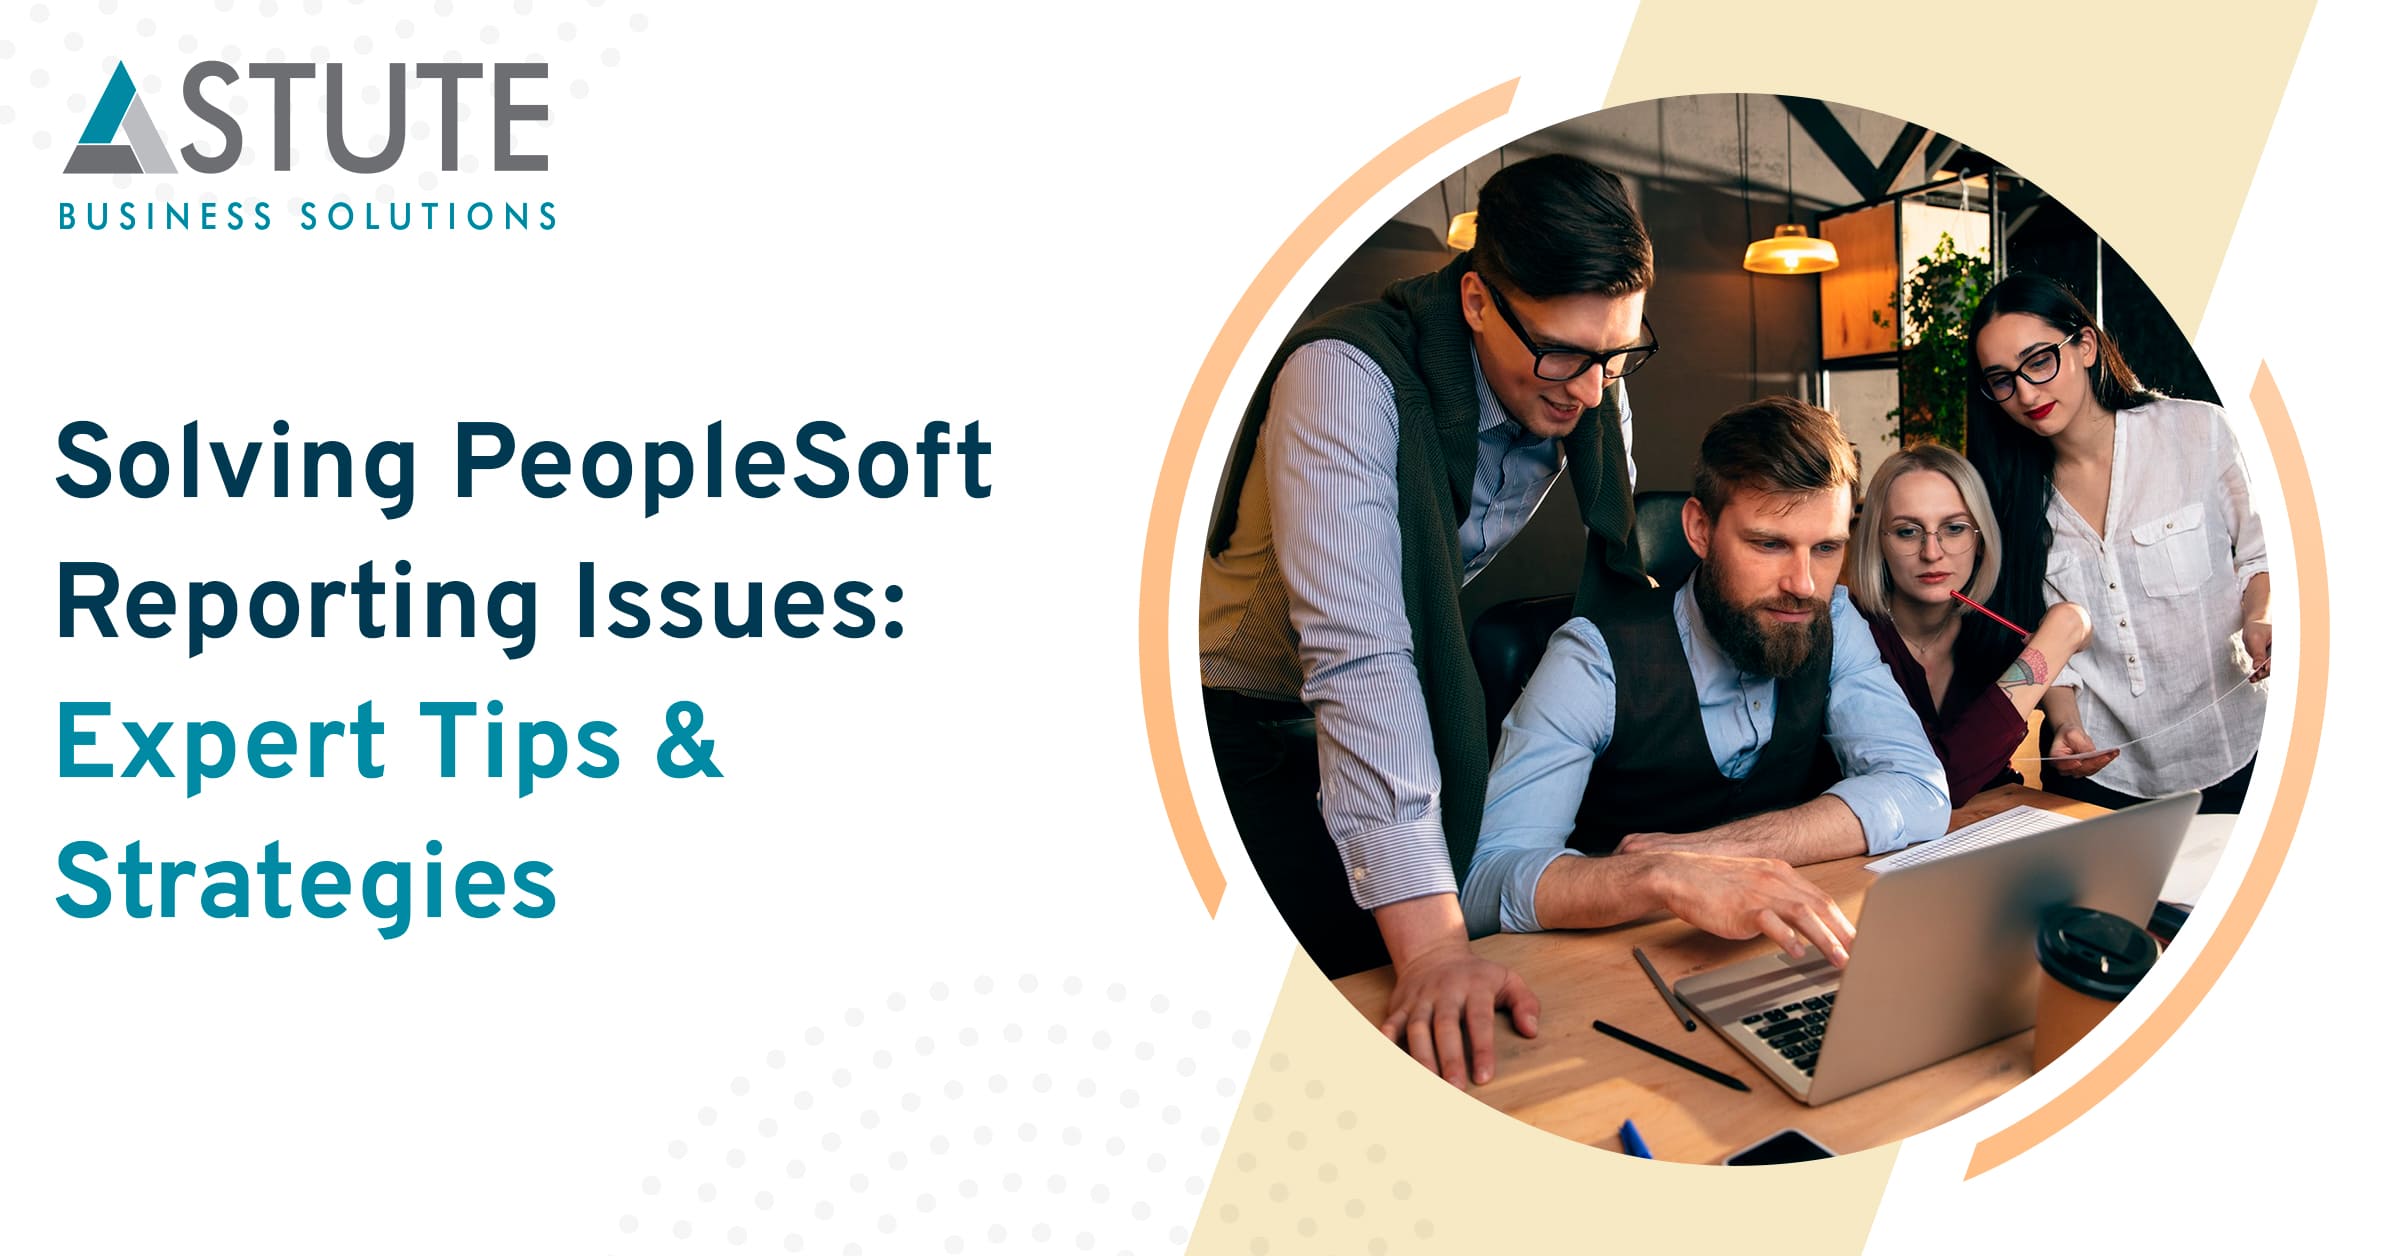 Solving PeopleSoft Reporting Issues: Expert Tips & Strategies